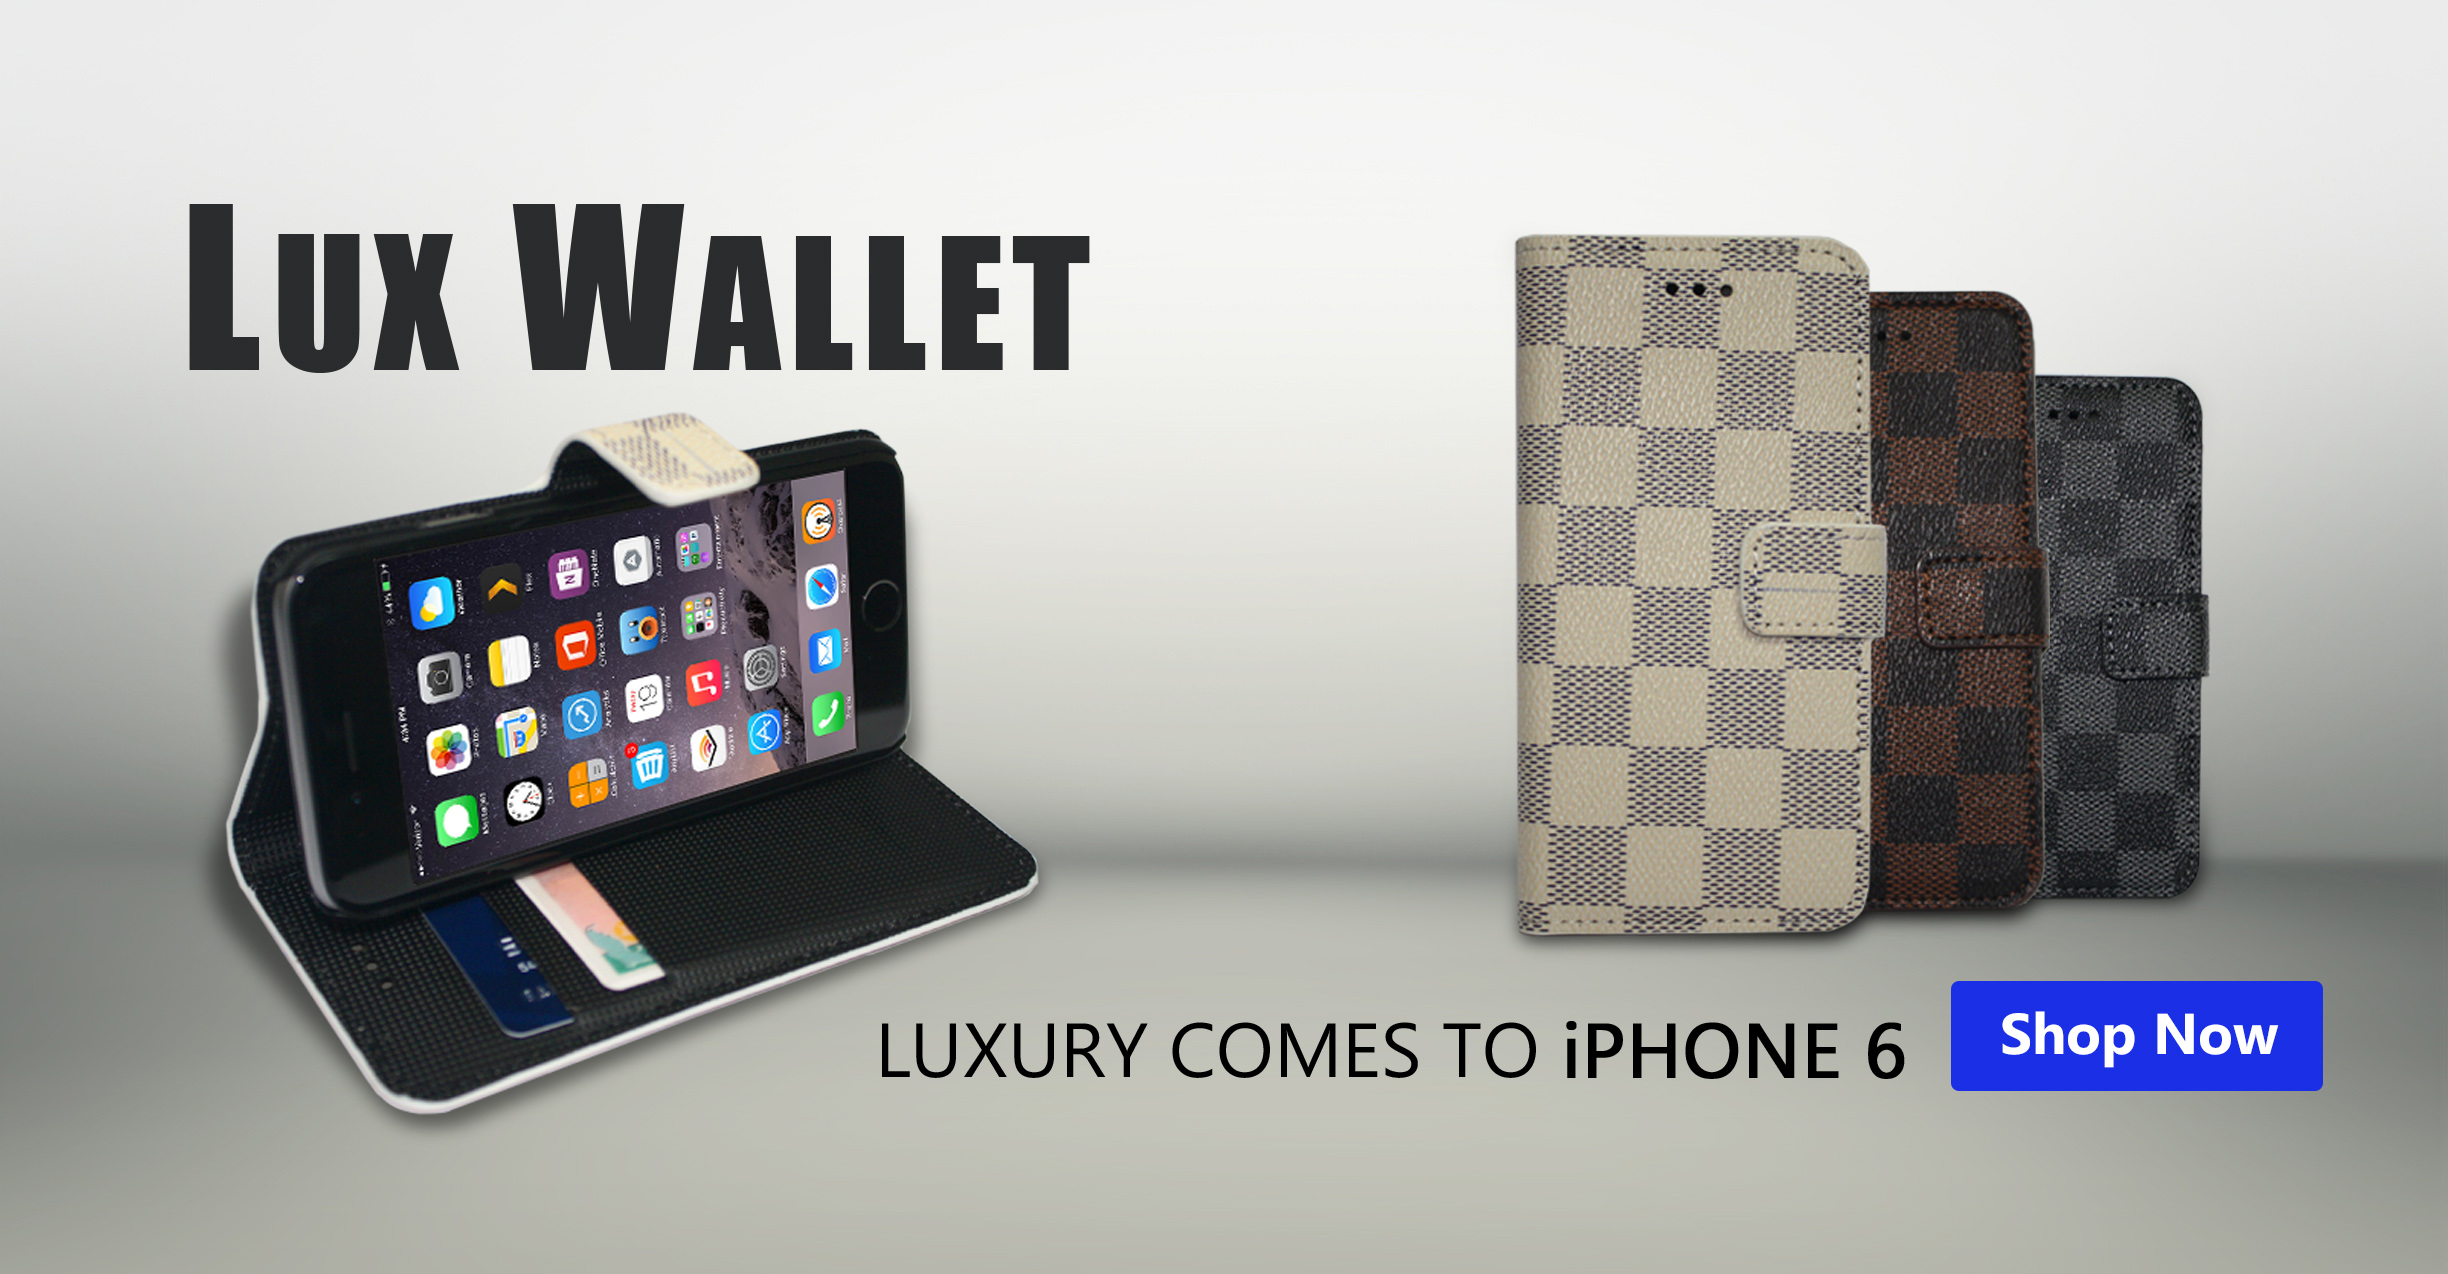 The Lux Wallet